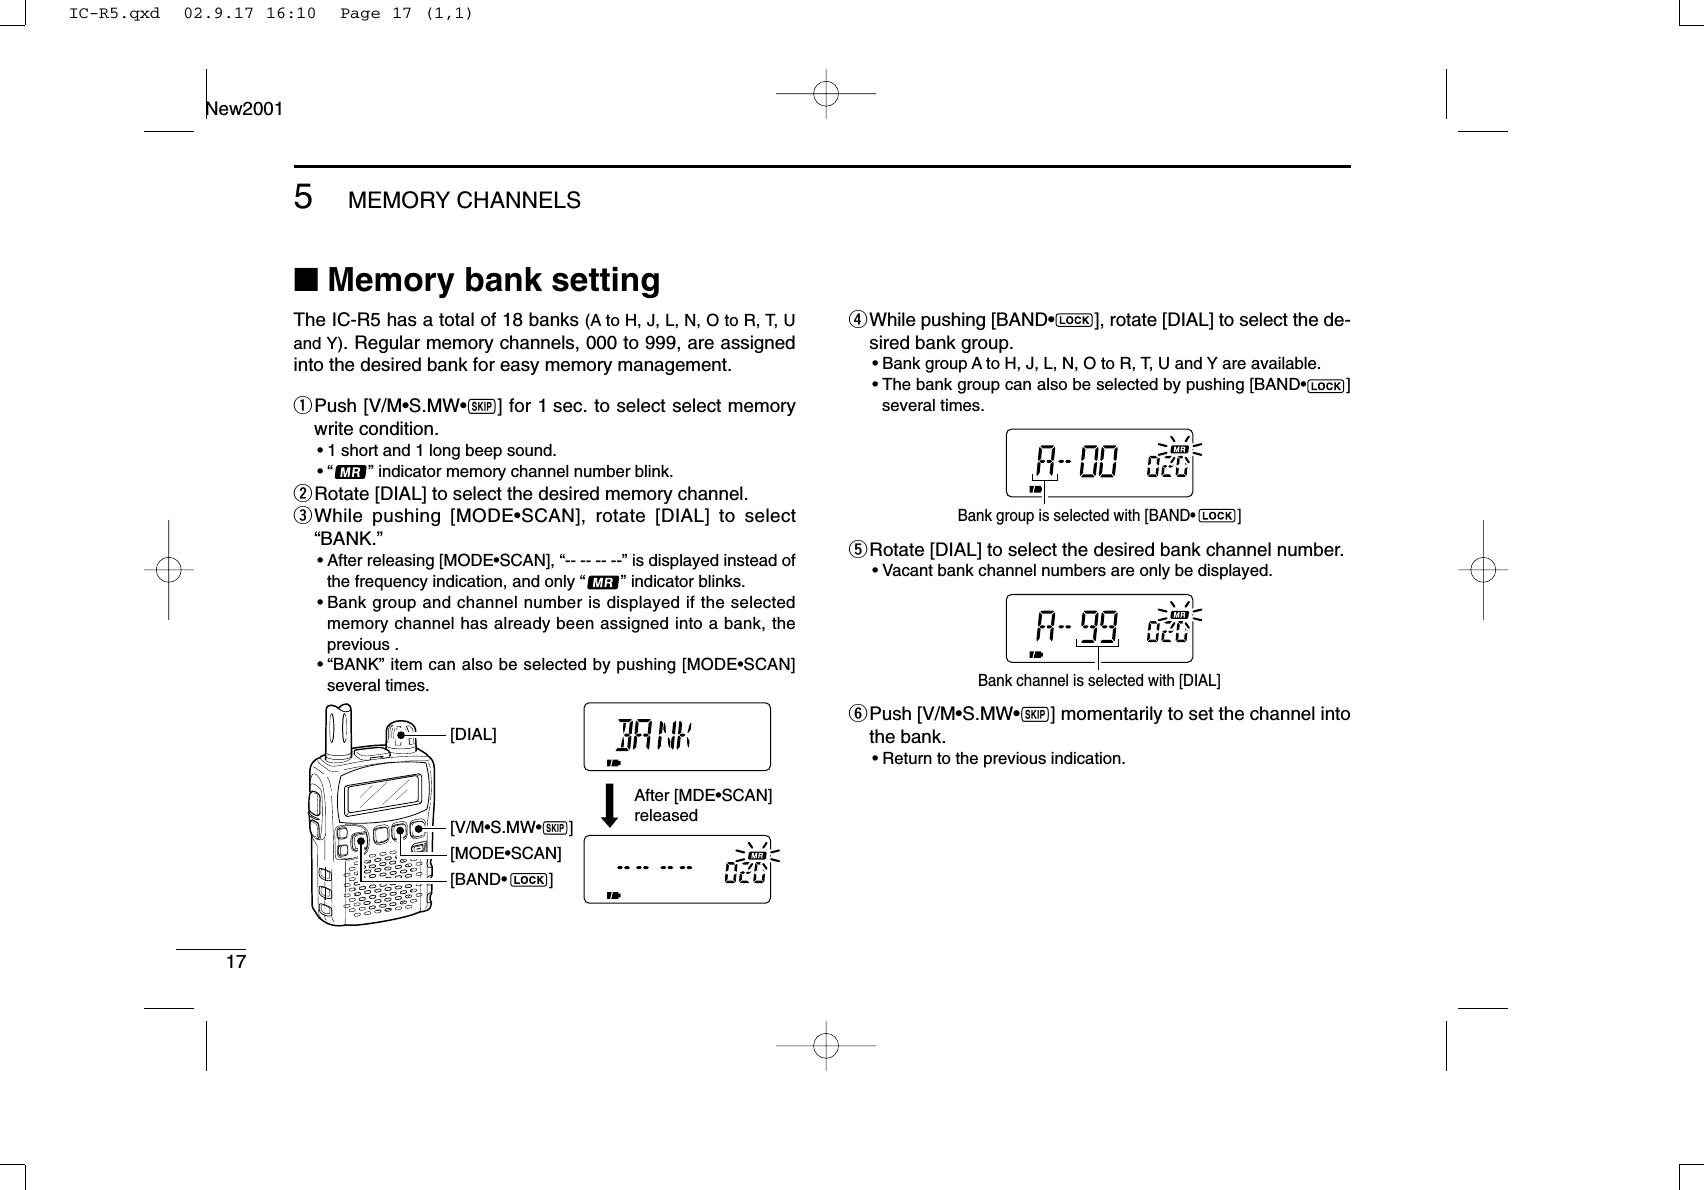 175MEMORY CHANNELSNew2001■Memory bank settingThe IC-R5 has a total of 18 banks (A to H, J, L, N, O to R, T, Uand Y). Regular memory channels, 000 to 999, are assignedinto the desired bank for easy memory management.qPush [V/M•S.MW•~] for 1 sec. to select select memorywrite condition.•1 short and 1 long beep sound.•“ ” indicator memory channel number blink.wRotate [DIAL] to select the desired memory channel.eWhile pushing [MODE•SCAN], rotate [DIAL] to select“BANK.”•After releasing [MODE•SCAN], “-- -- -- --” is displayed instead ofthe frequency indication, and only “” indicator blinks.•Bank group and channel number is displayed if the selectedmemory channel has already been assigned into a bank, theprevious .•“BANK” item can also be selected by pushing [MODE•SCAN]several times.rWhile pushing [BAND•], rotate [DIAL] to select the de-sired bank group.•Bank group A to H, J, L, N, O to R, T, U and Y are available.•The bank group can also be selected by pushing [BAND•]several times.tRotate [DIAL] to select the desired bank channel number.•Vacant bank channel numbers are only be displayed.yPush [V/M•S.MW•~] momentarily to set the channel intothe bank.•Return to the previous indication.Bank channel is selected with [DIAL]Bank group is selected with [BAND•          ][V/M•S.MW•~][MODE•SCAN][DIAL]After [MDE•SCAN] released[BAND•         ]IC-R5.qxd  02.9.17 16:10  Page 17 (1,1)